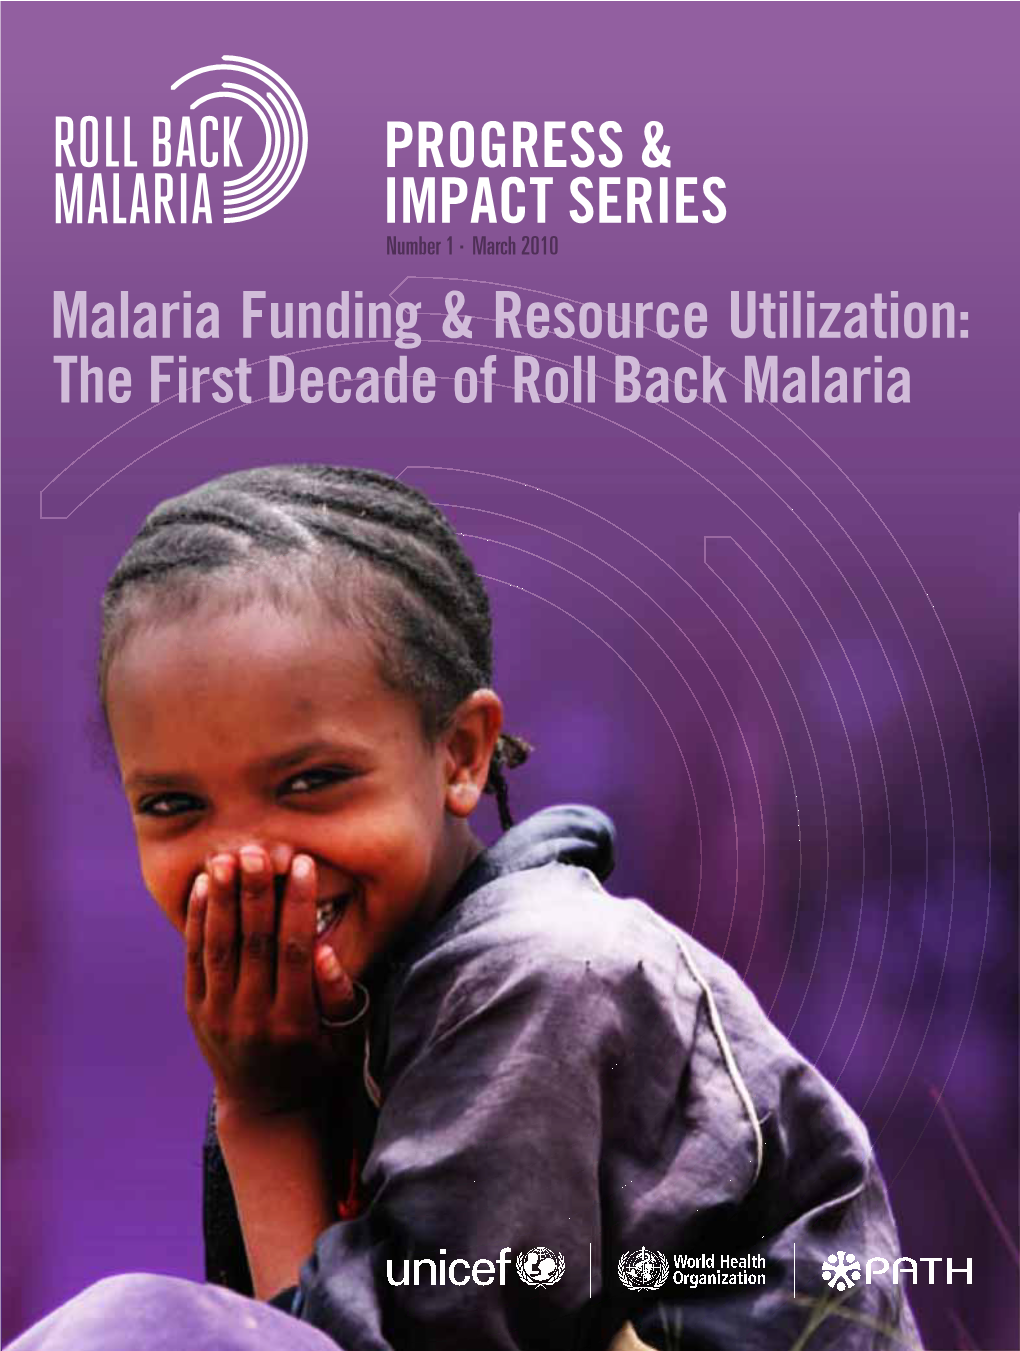 The First Decade of Roll Back Malaria